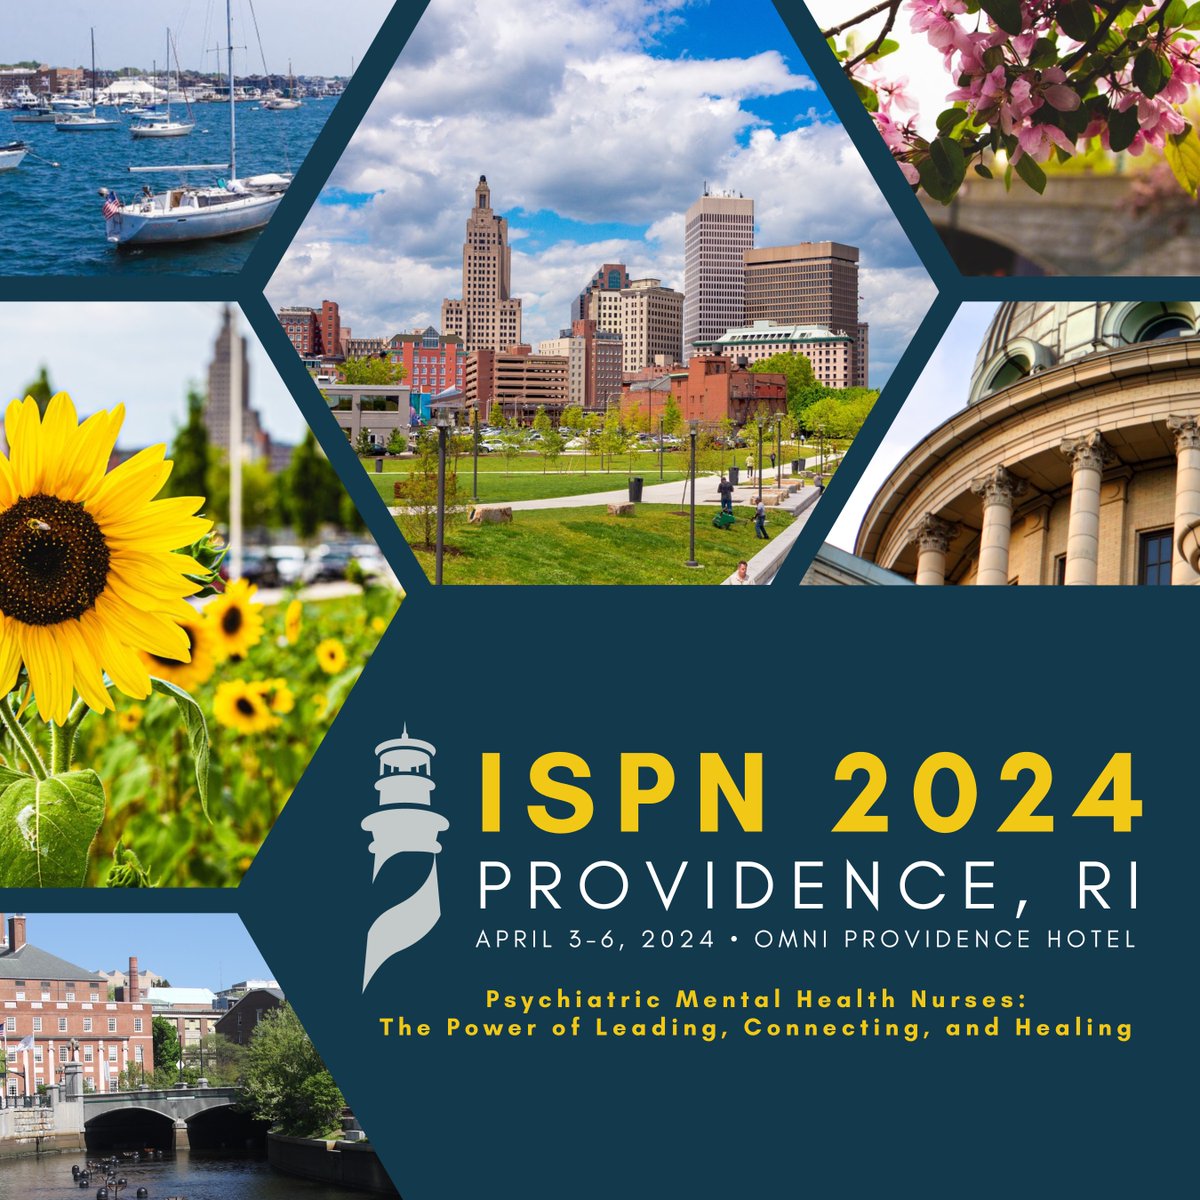 ISPN's Annual Conference (April 3-6) offers something for everyone...general lectures, 40 break-outs, Foundation Auction, networking. Take advantage of the early discount before this Friday, March 1. Details here at. ispn-psych.org/2024_program @ispnconnect @ispnconnect2024